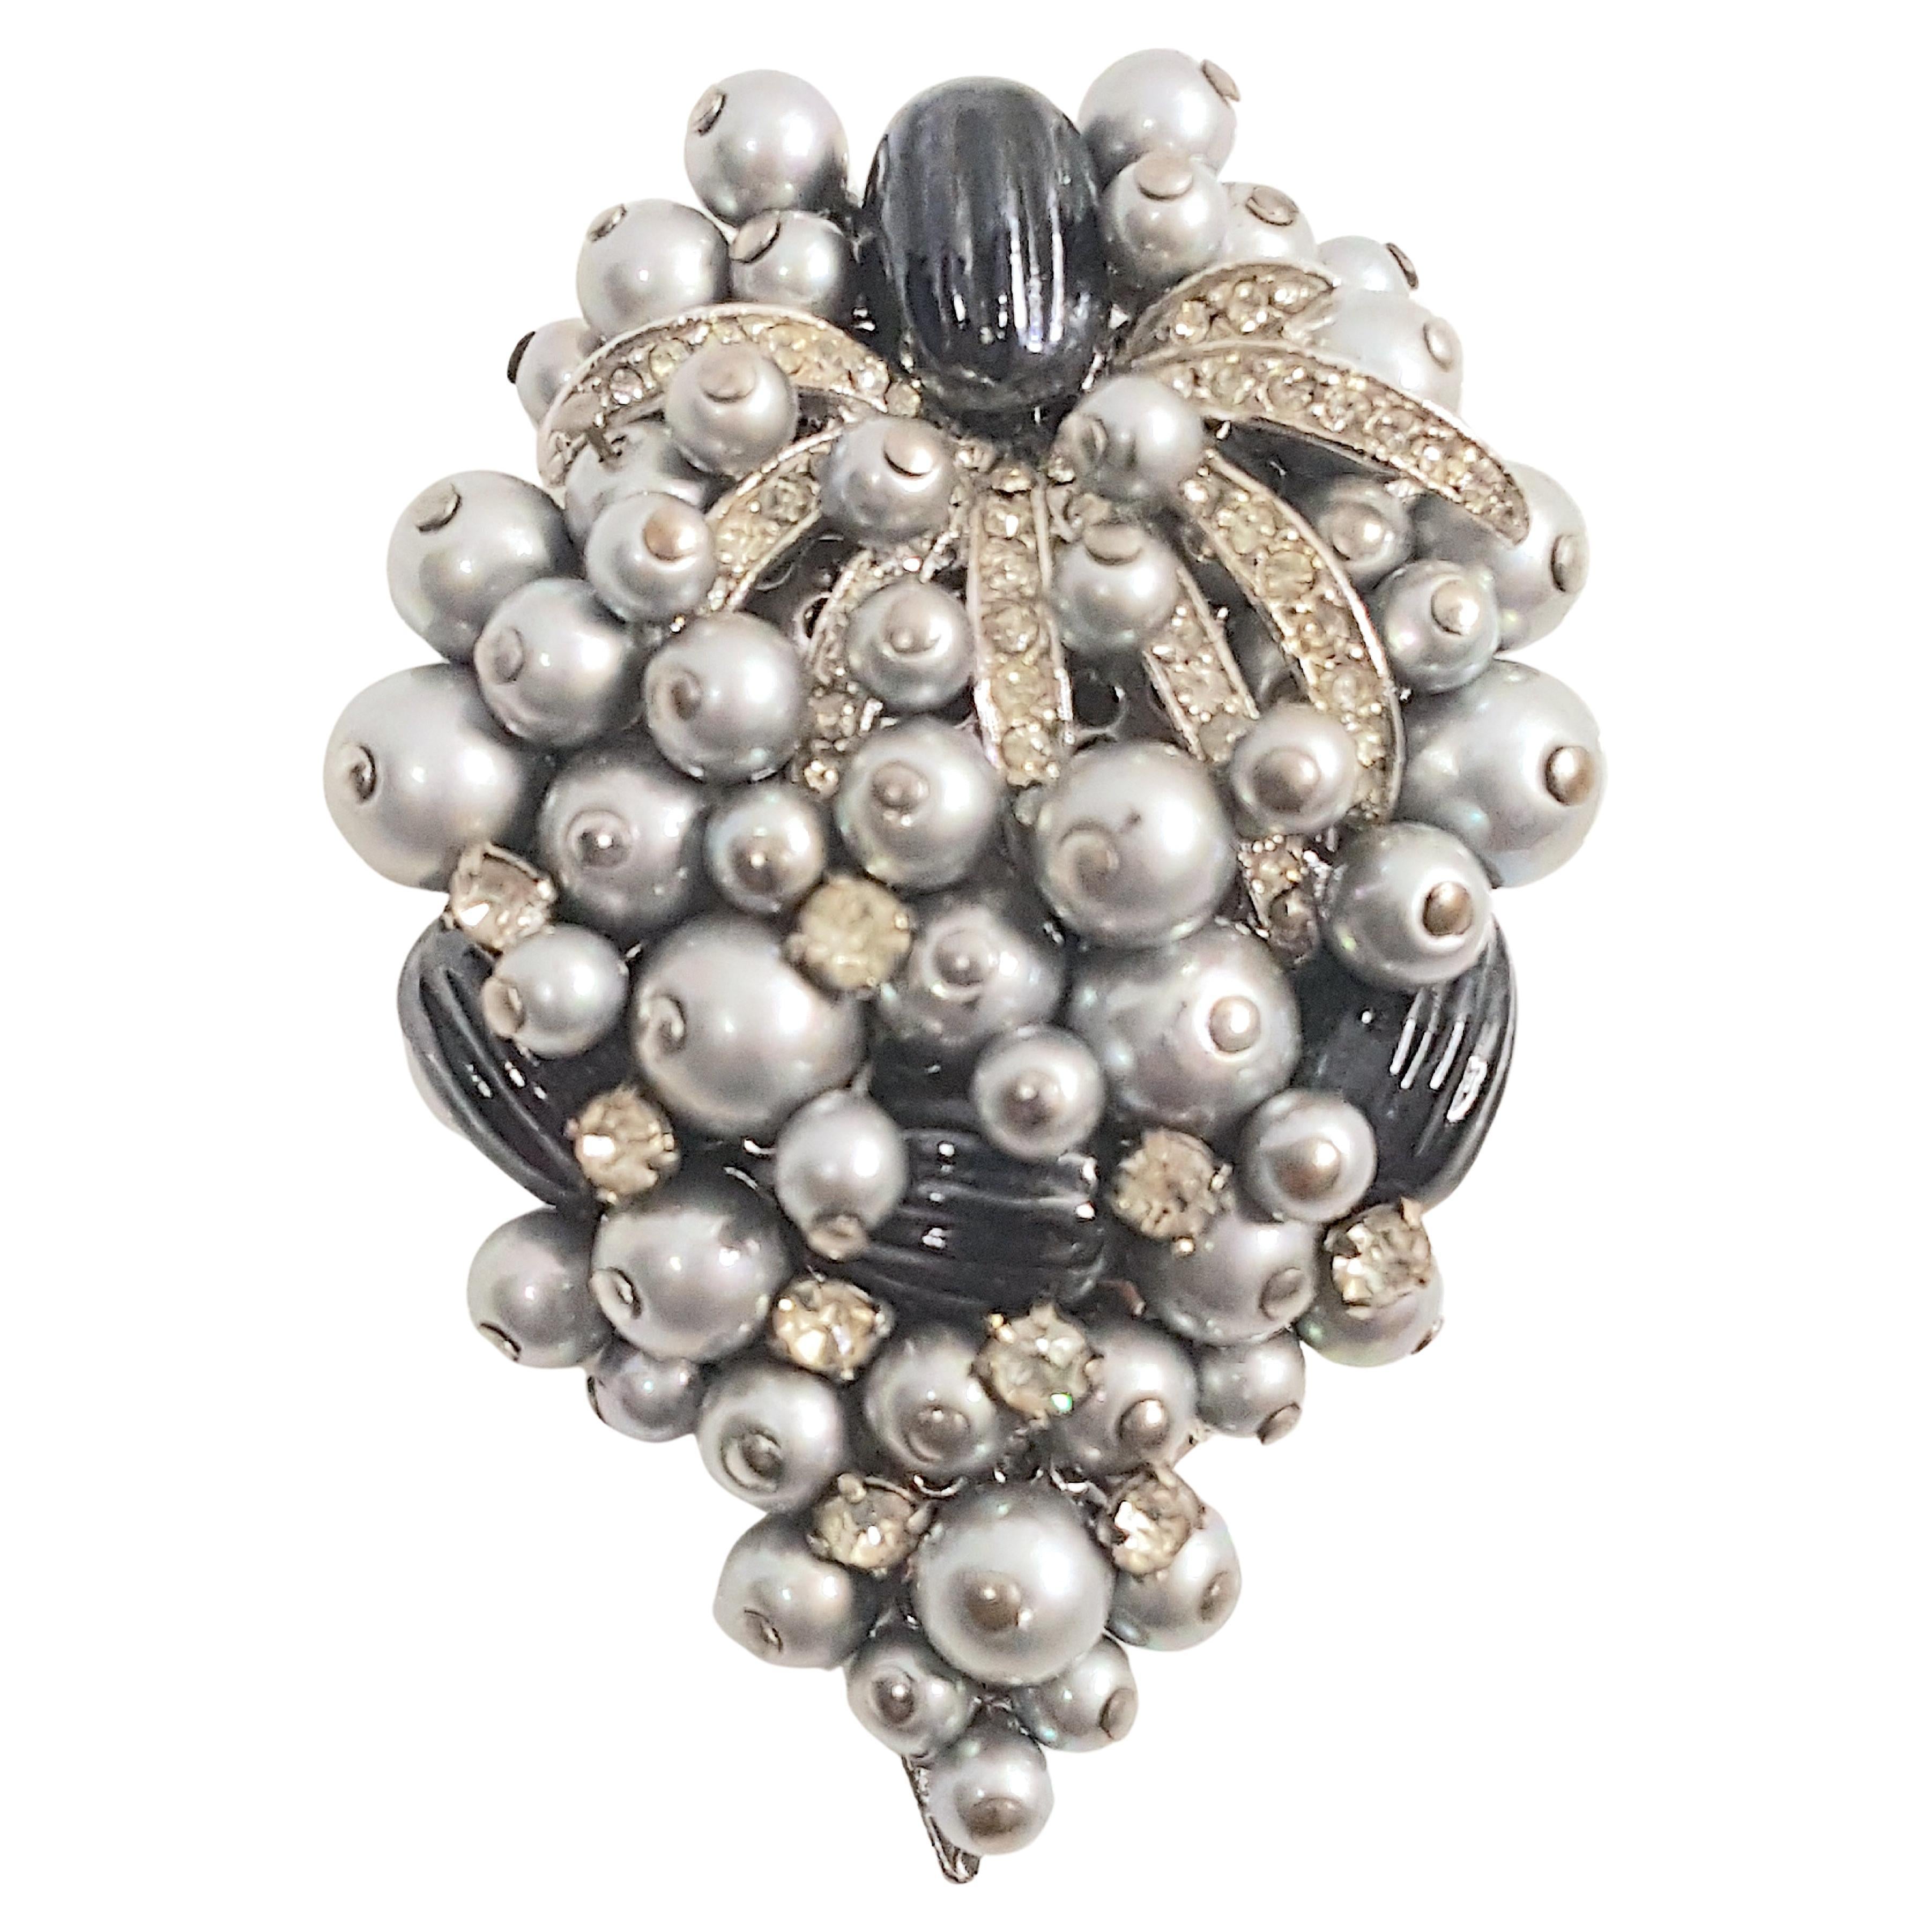 Couture 1939-50 Schiaparelli-SchlumbergerStyle GlassBeads ProngSetCrystal Brooch For Sale